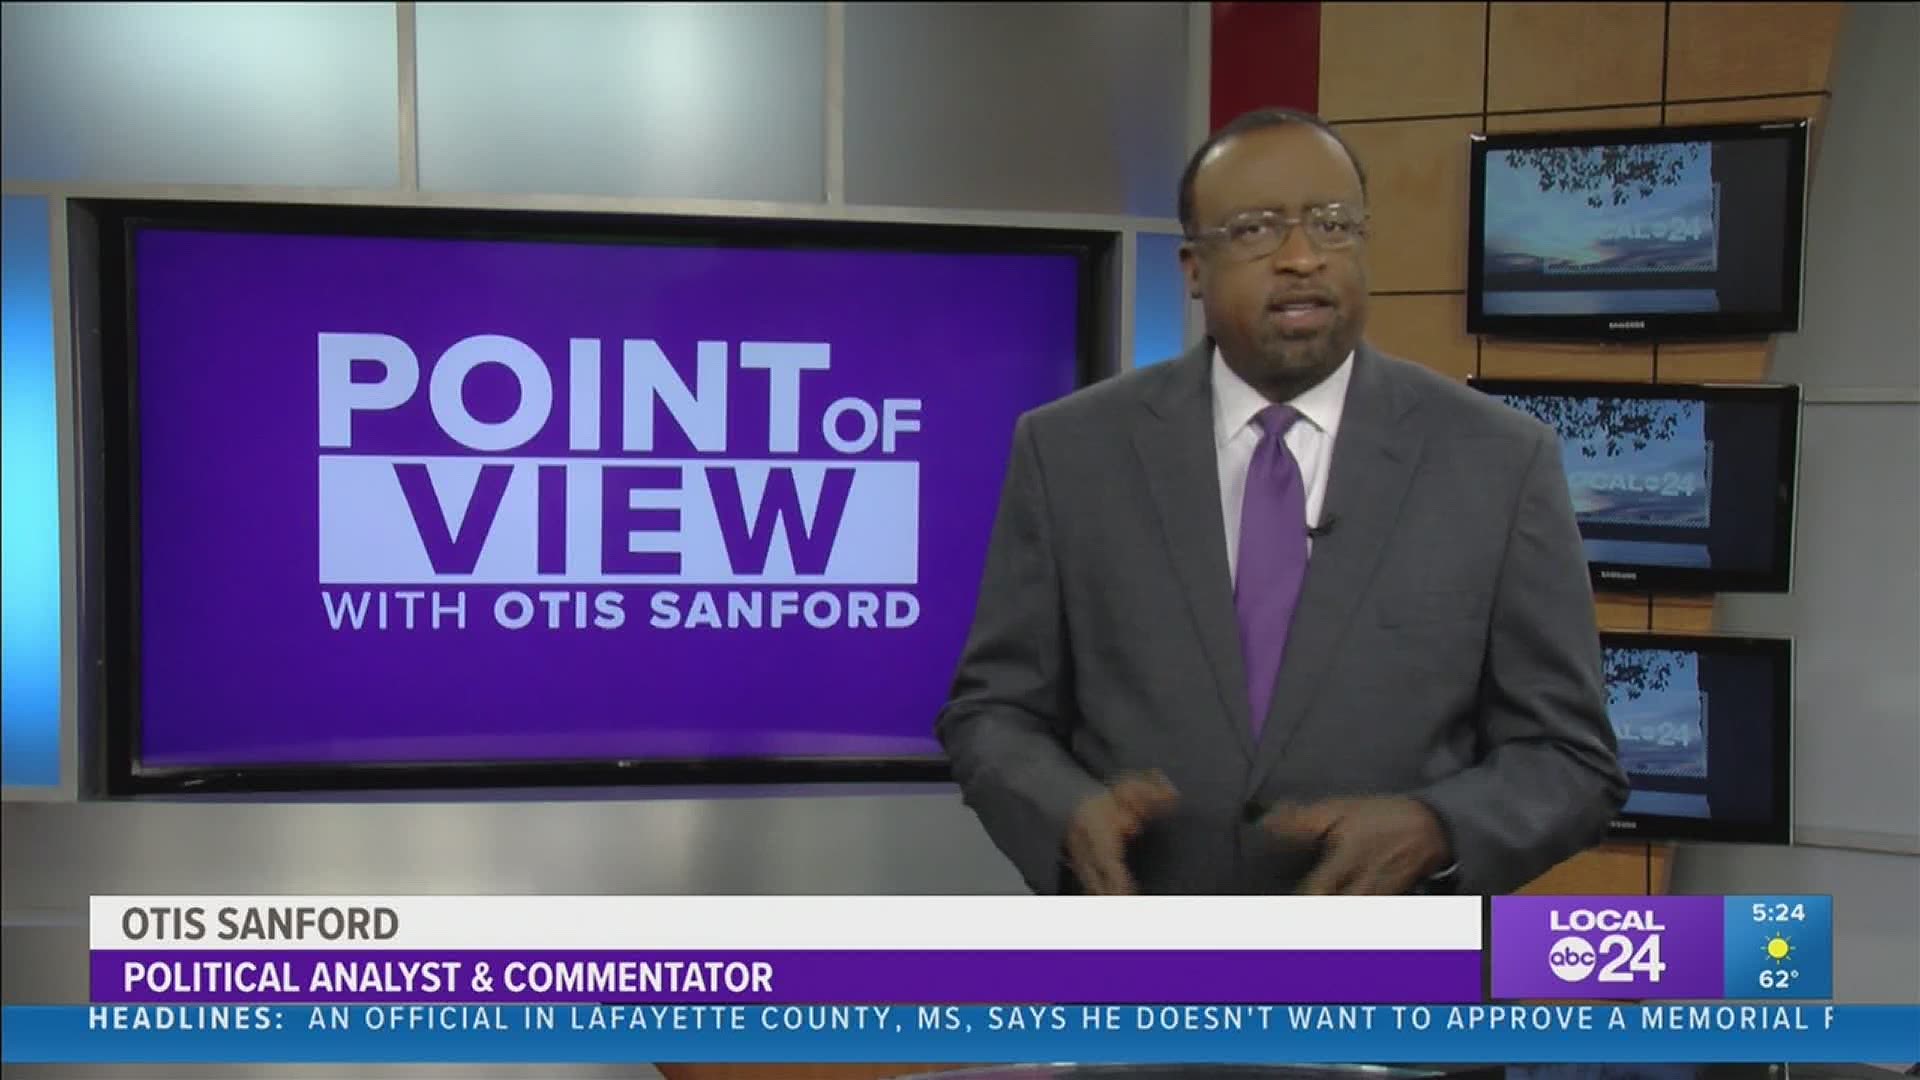 Local 24 news political analyst and commentator Otis Sanford shares his point of view on the selection of a retire MPD officer as chairman of CLERB.